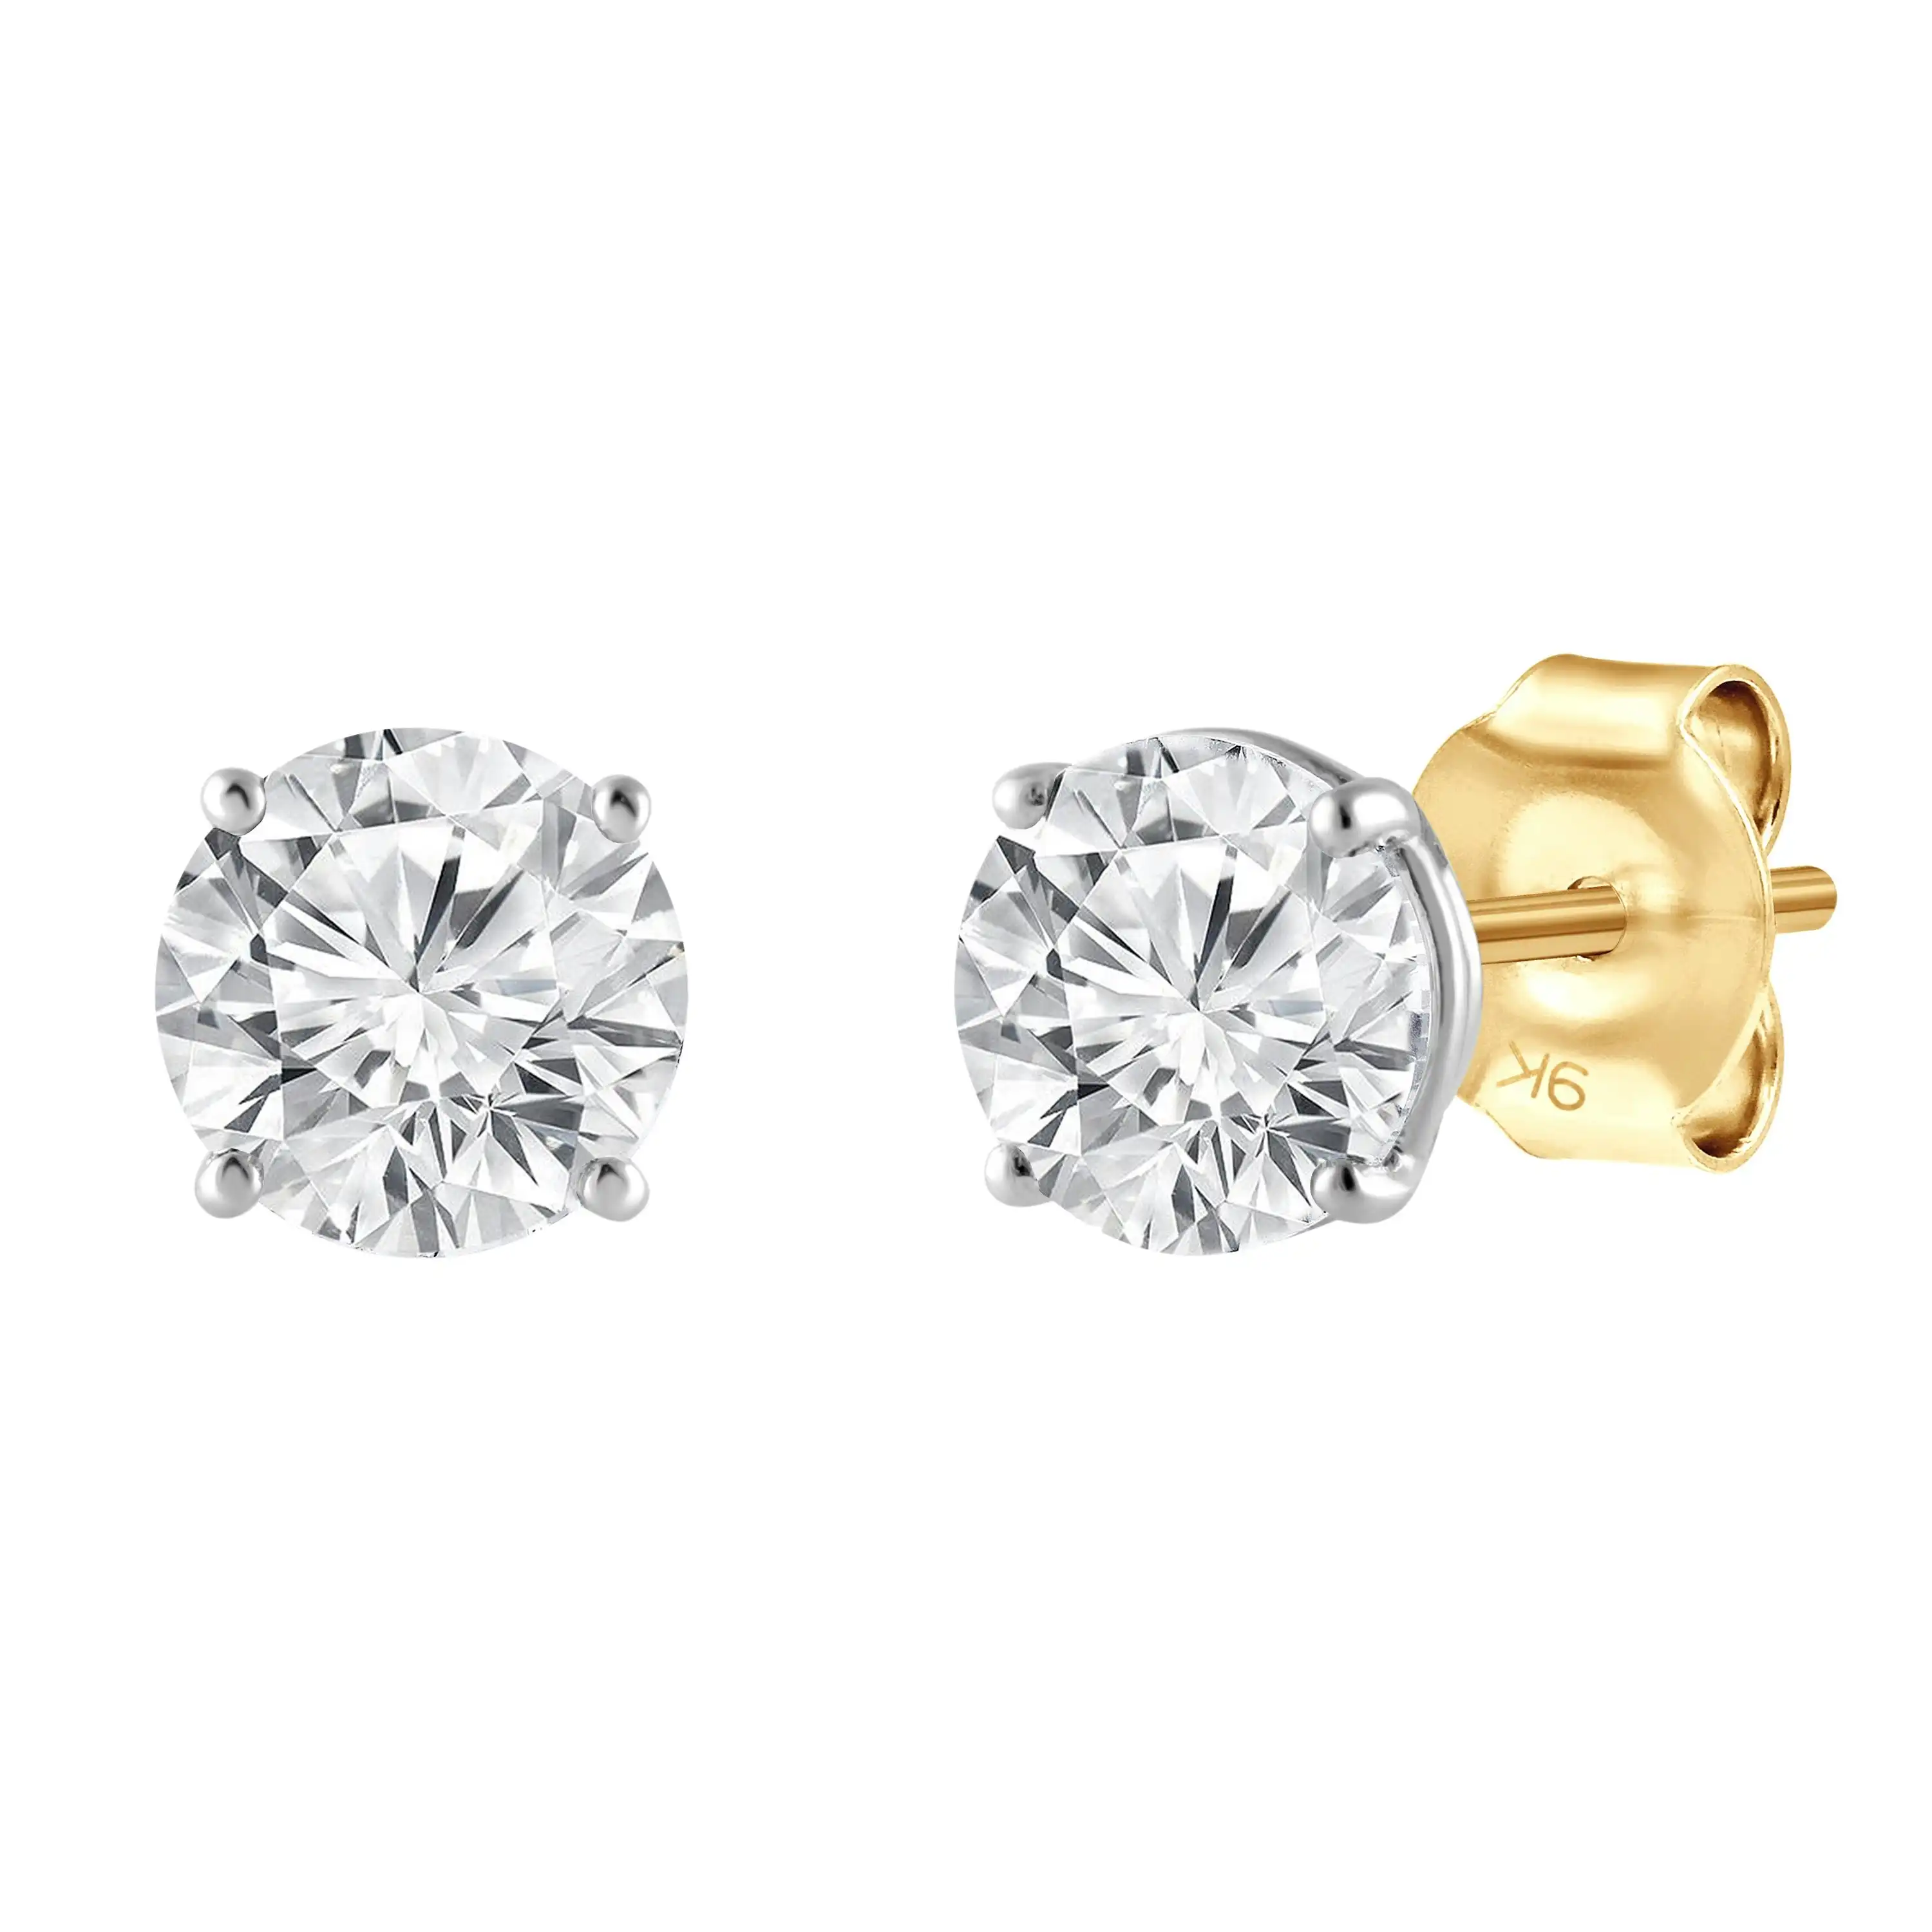 Meera 1.00ct Solitaire Laboratory Grown Diamond Earrings in 9ct Yellow Gold